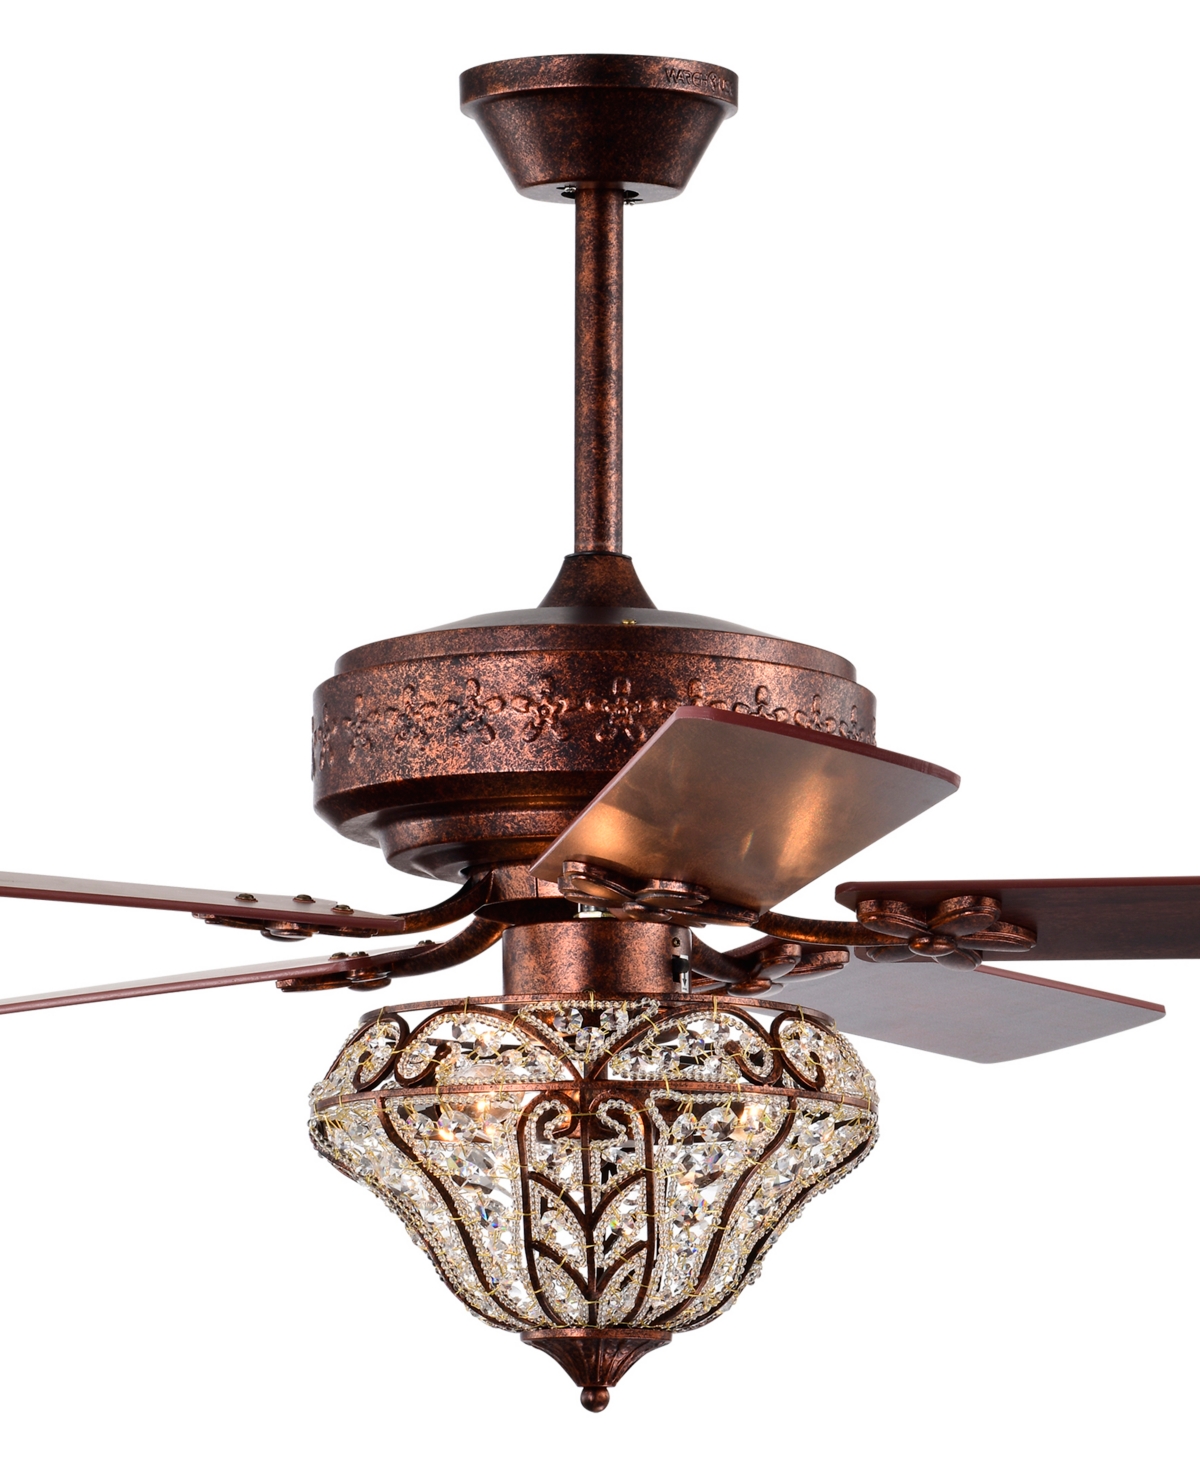 Home Accessories Luella 52" 3-light Indoor Ceiling Fan With Light Kit And Remote In Antique Copper